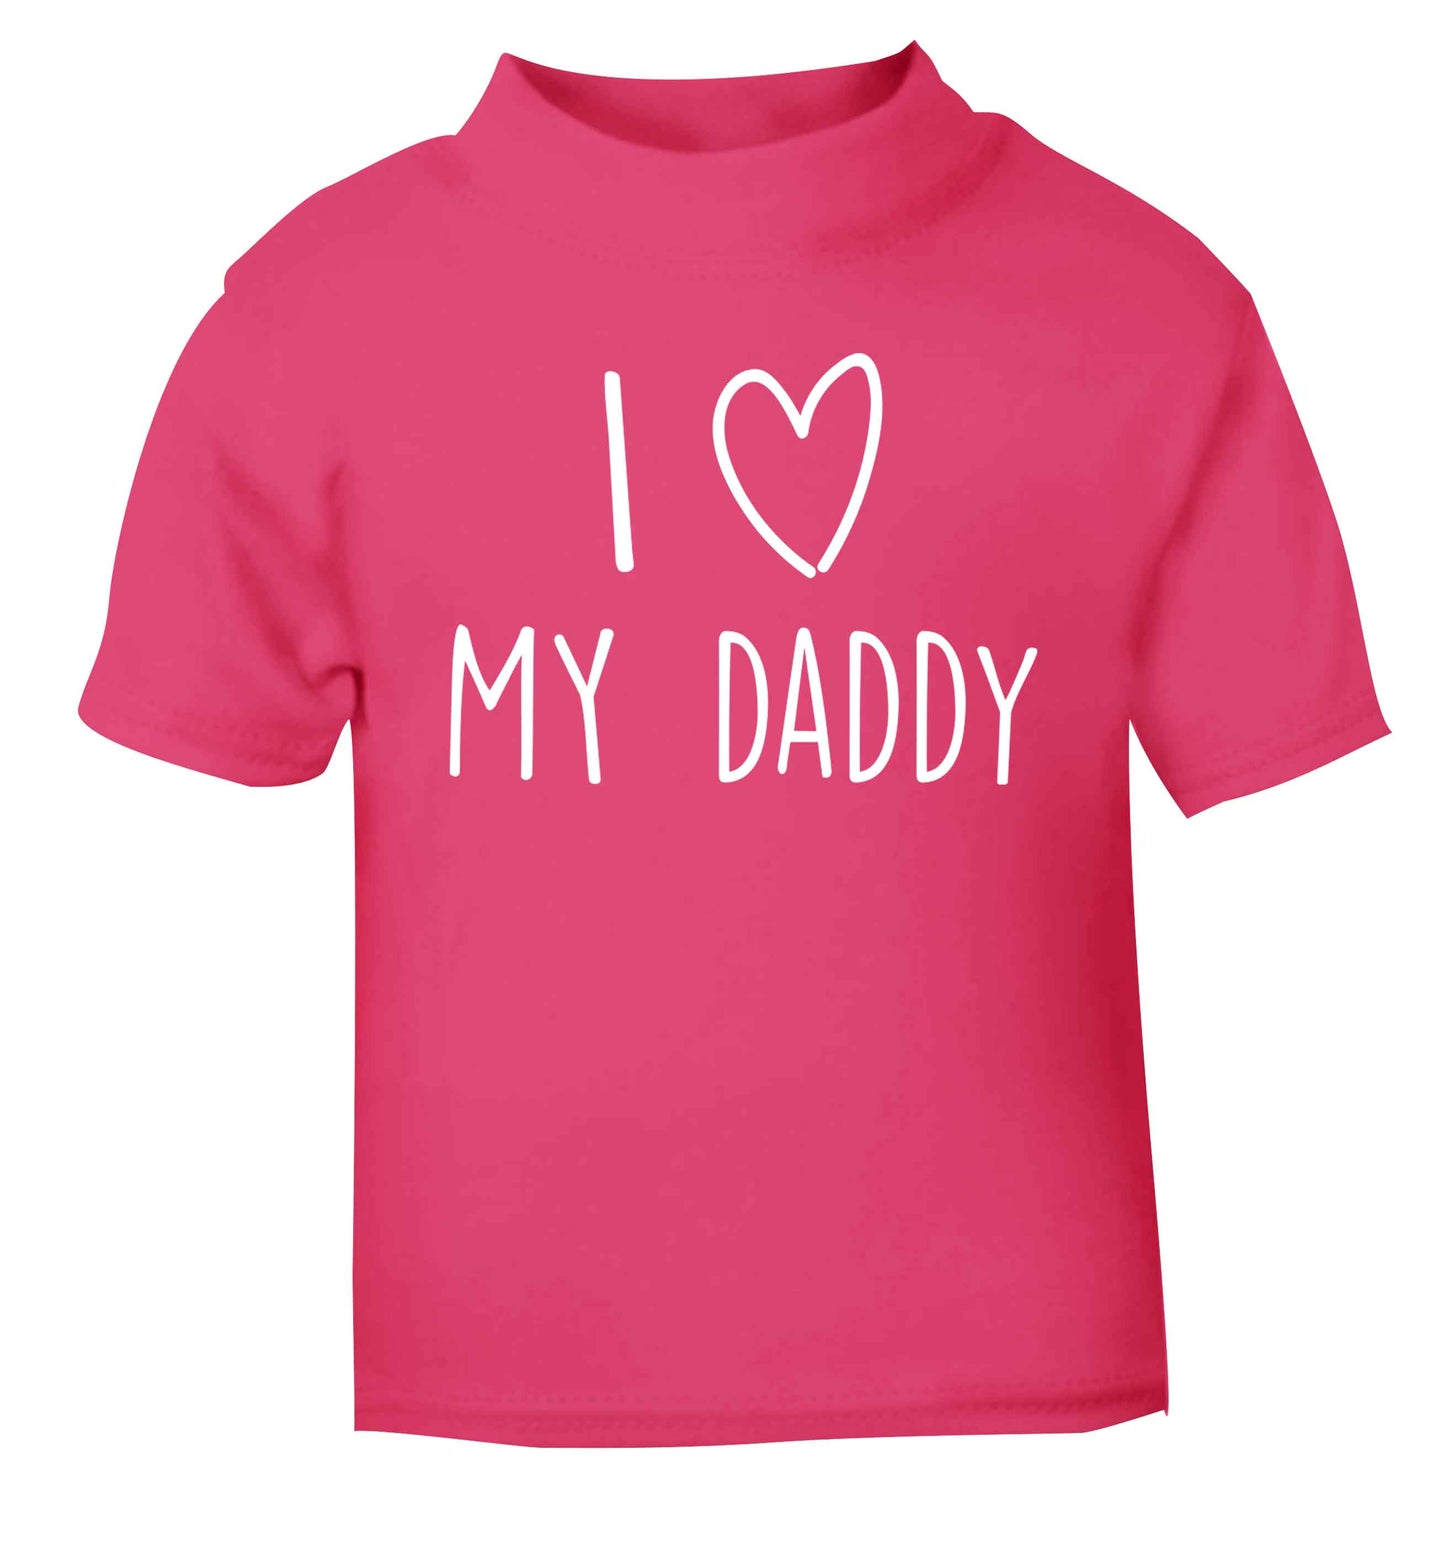 I love my daddy pink baby toddler Tshirt 2 Years